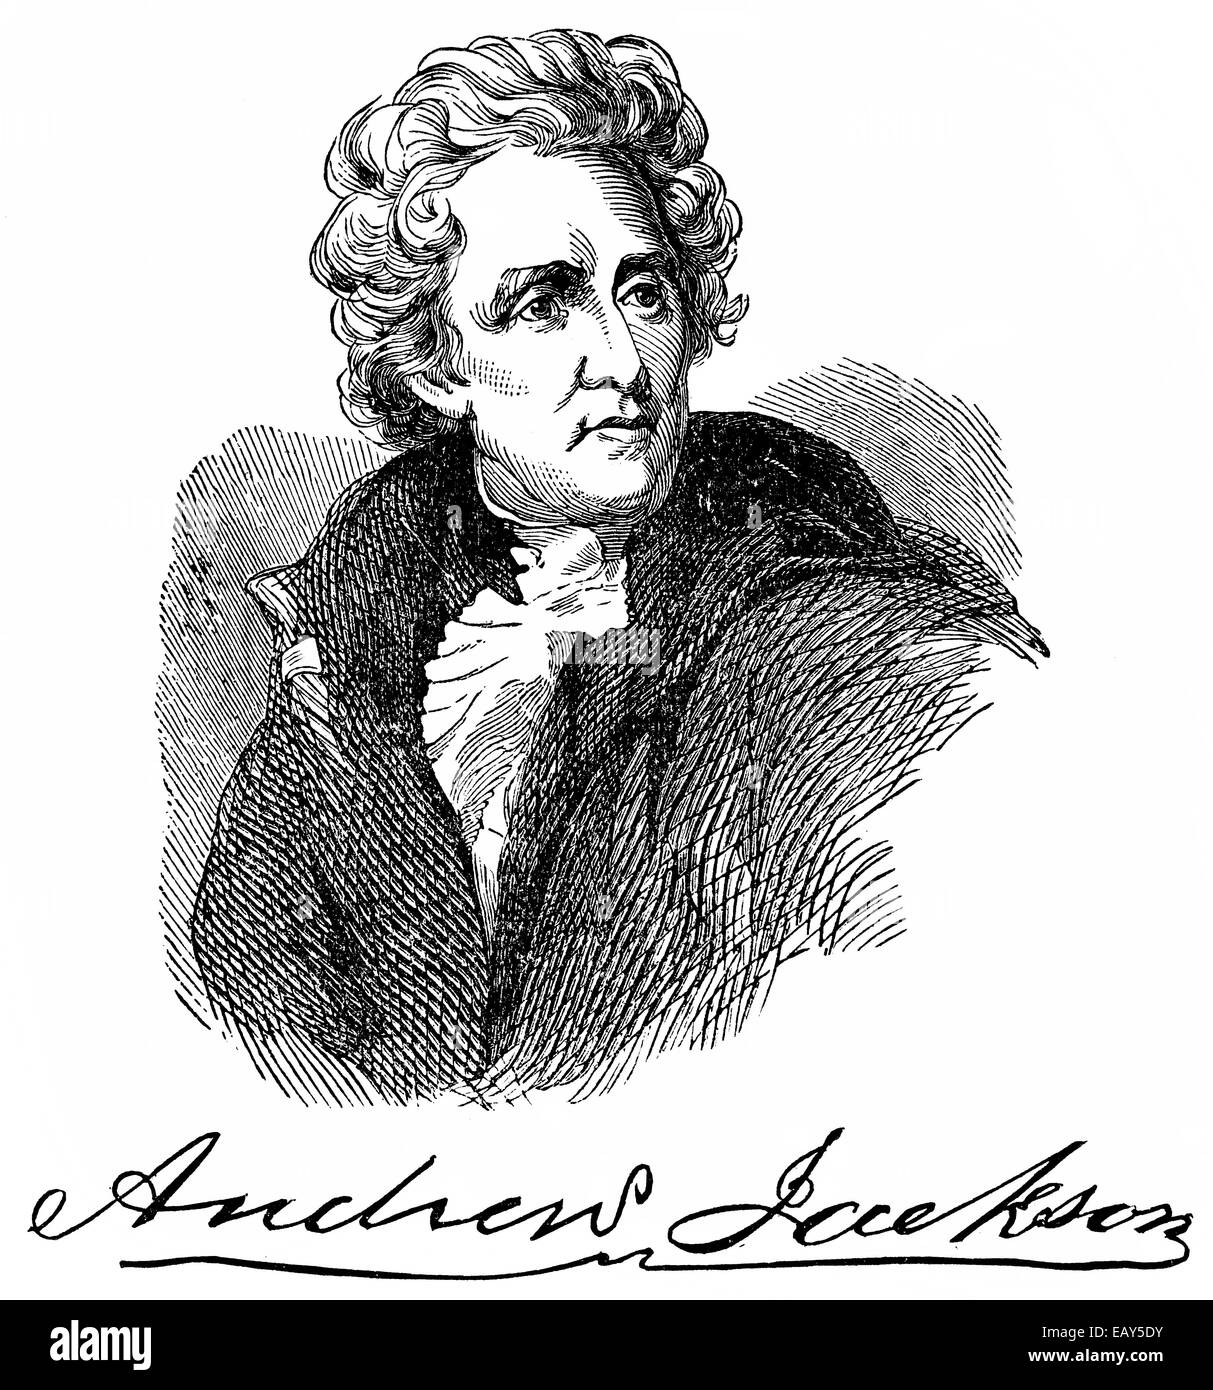 Andrew Jackson, 1767 - 1845, the seventh President of the United States, Andrew Jackson, 1767 - 1845, der 7. Präsident der Verei Stock Photo